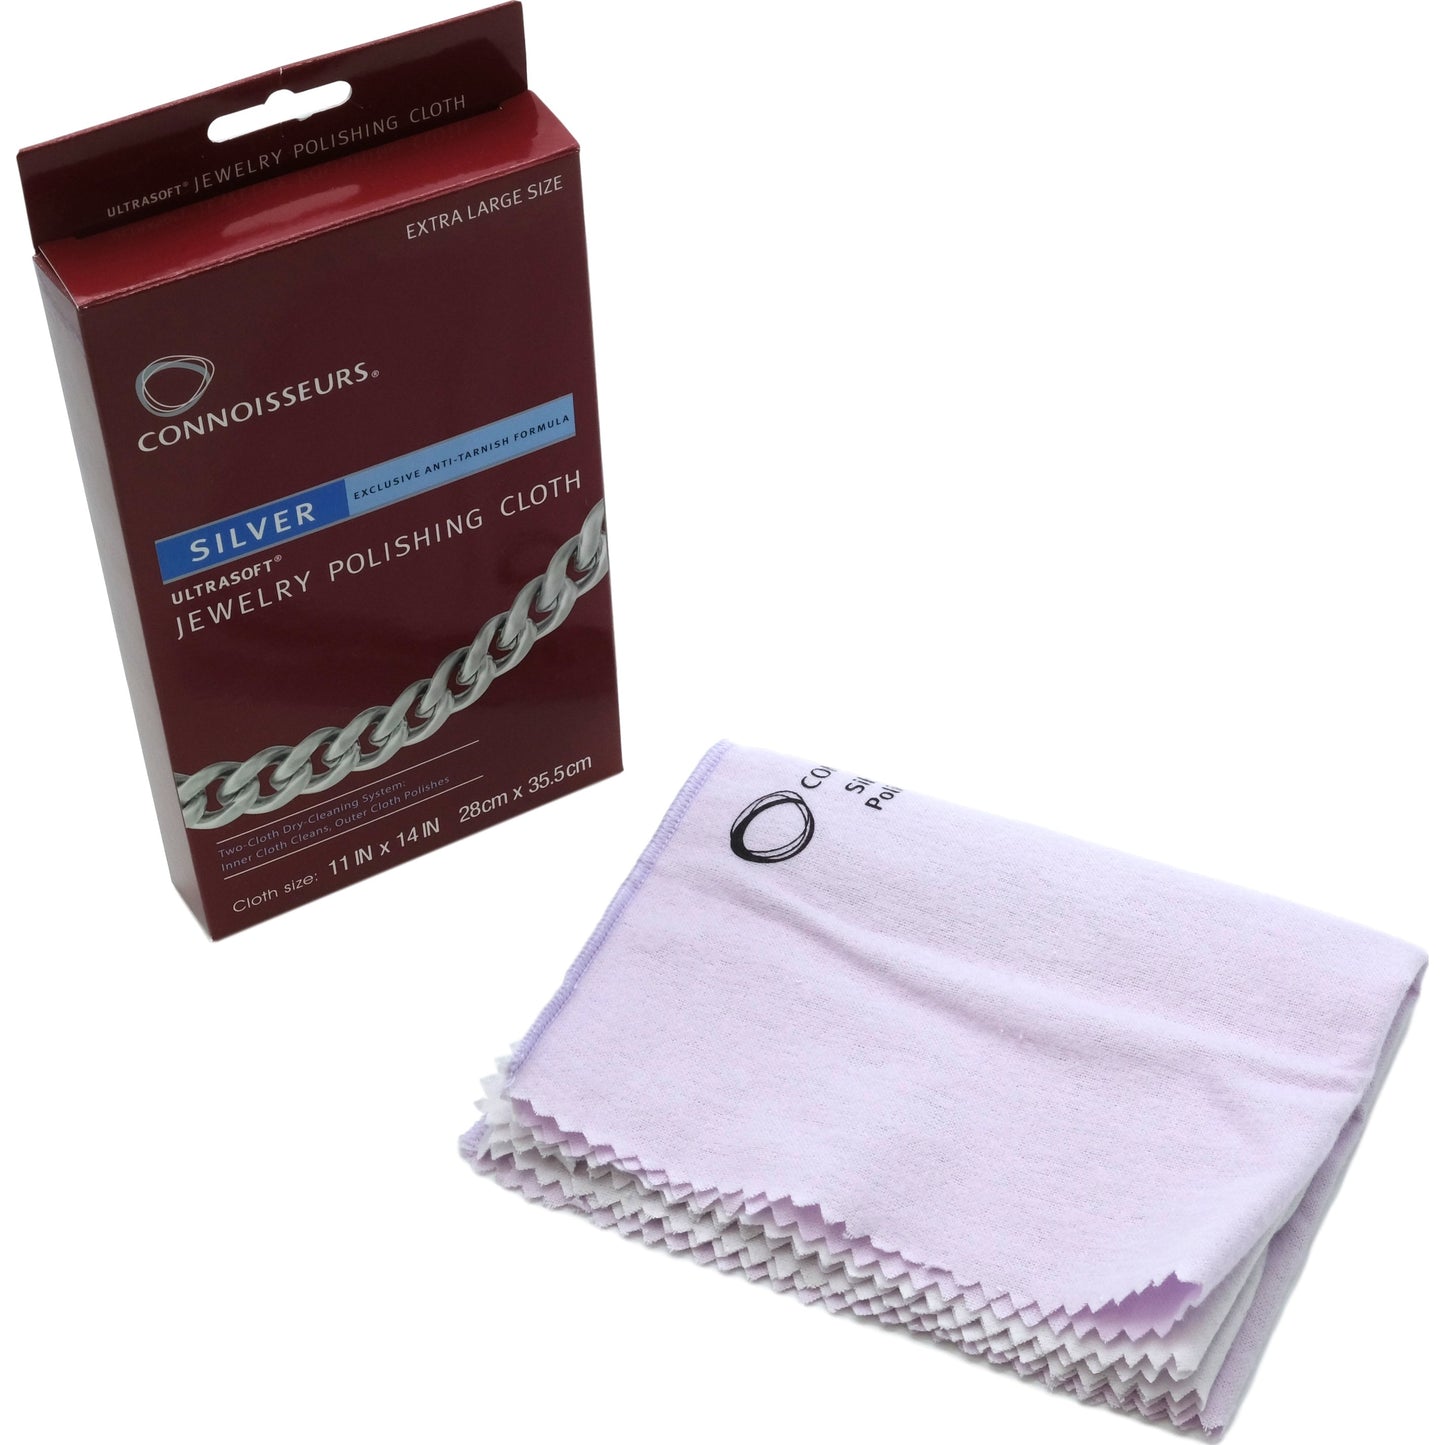 Connoisseurs Silver Jewelry Polishing Cloth Cleaner 11" x 14"